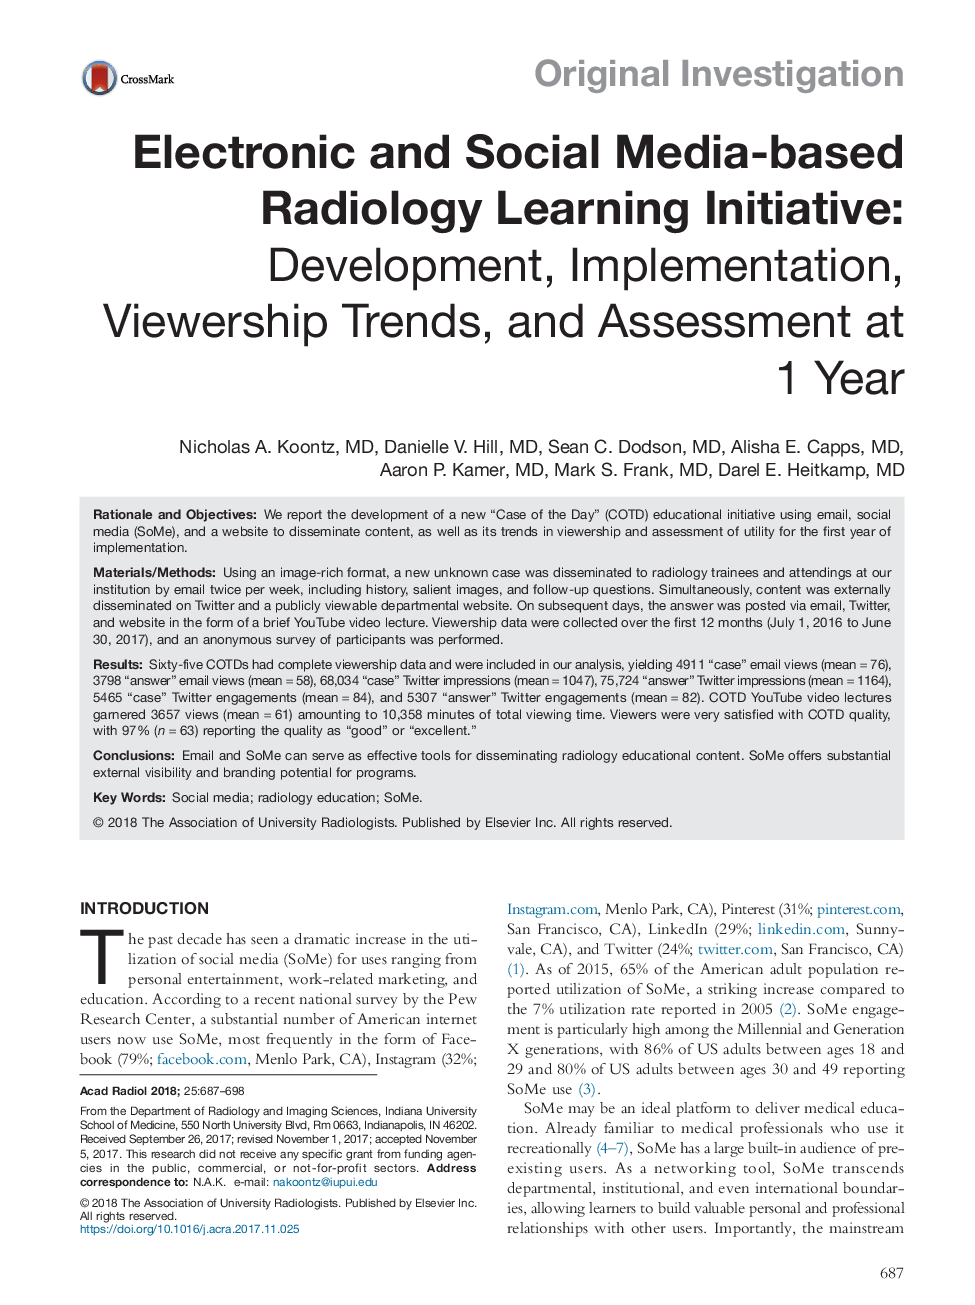 Electronic and Social Media-based Radiology Learning Initiative